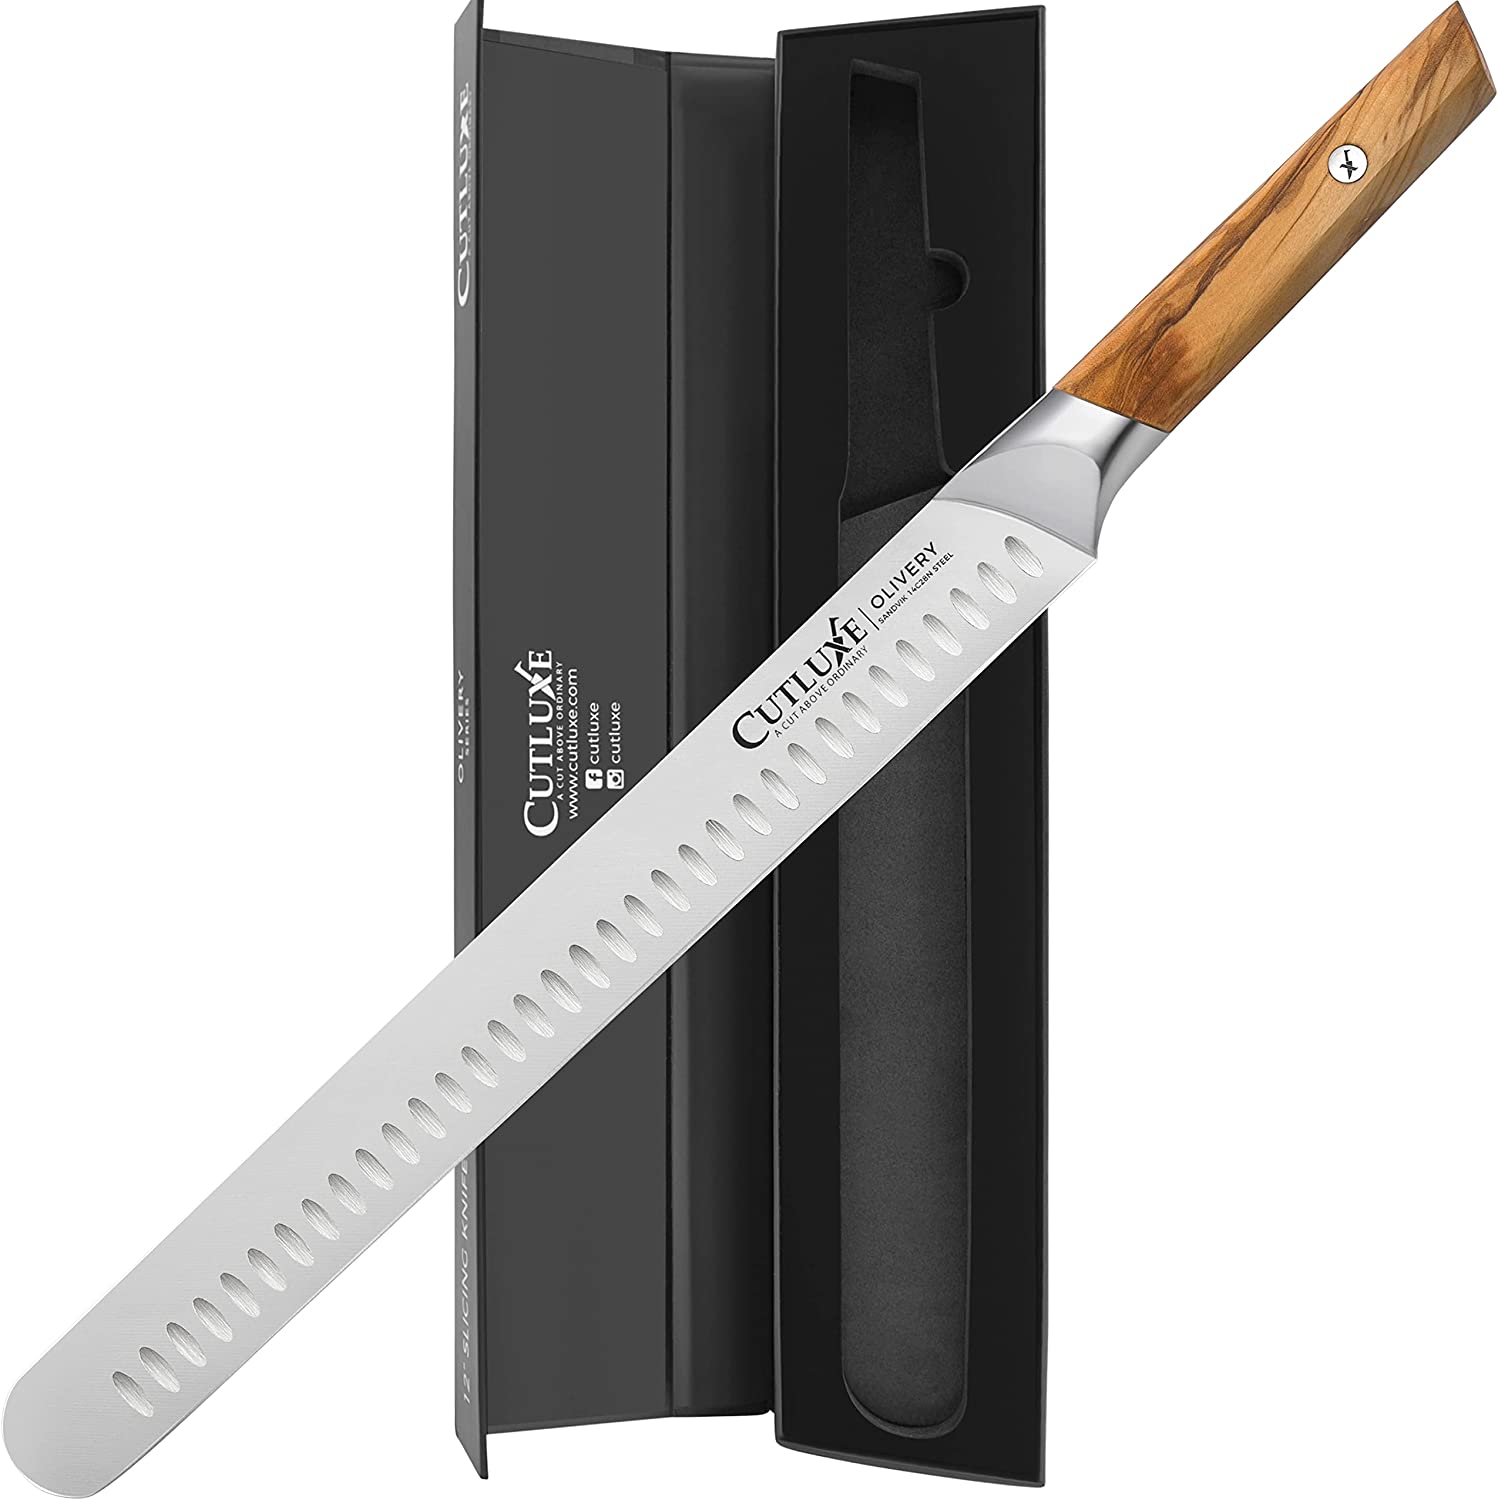 Everrich Kinfe set Price: N12,000 Cleaver knife Chef knife Carving